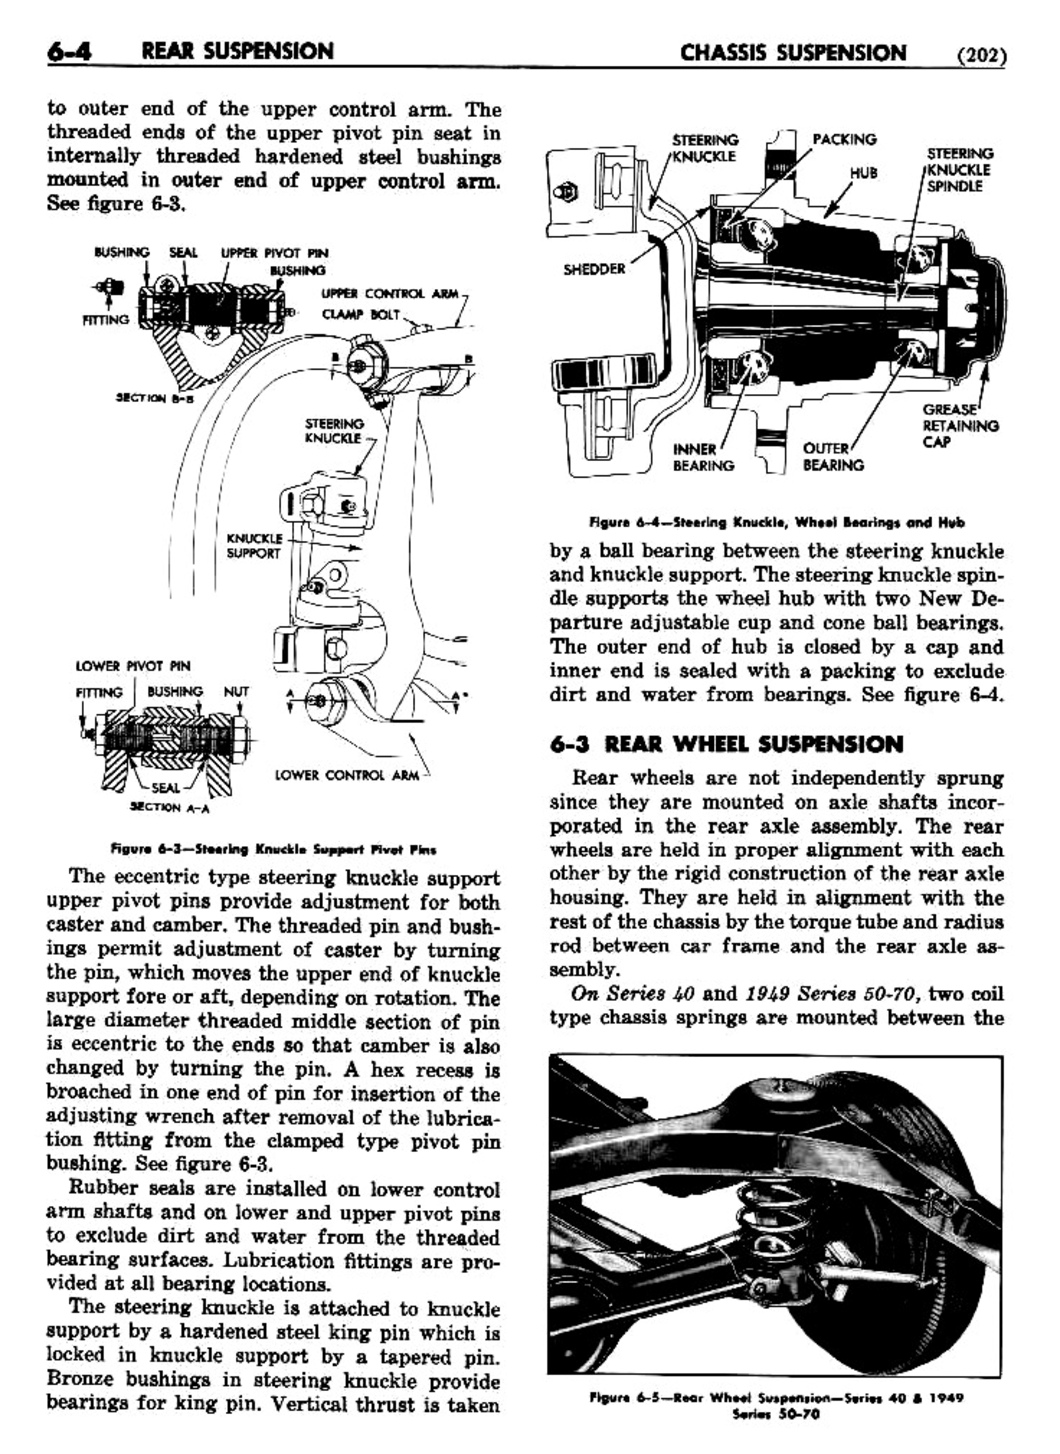 n_07 1948 Buick Shop Manual - Chassis Suspension-004-004.jpg